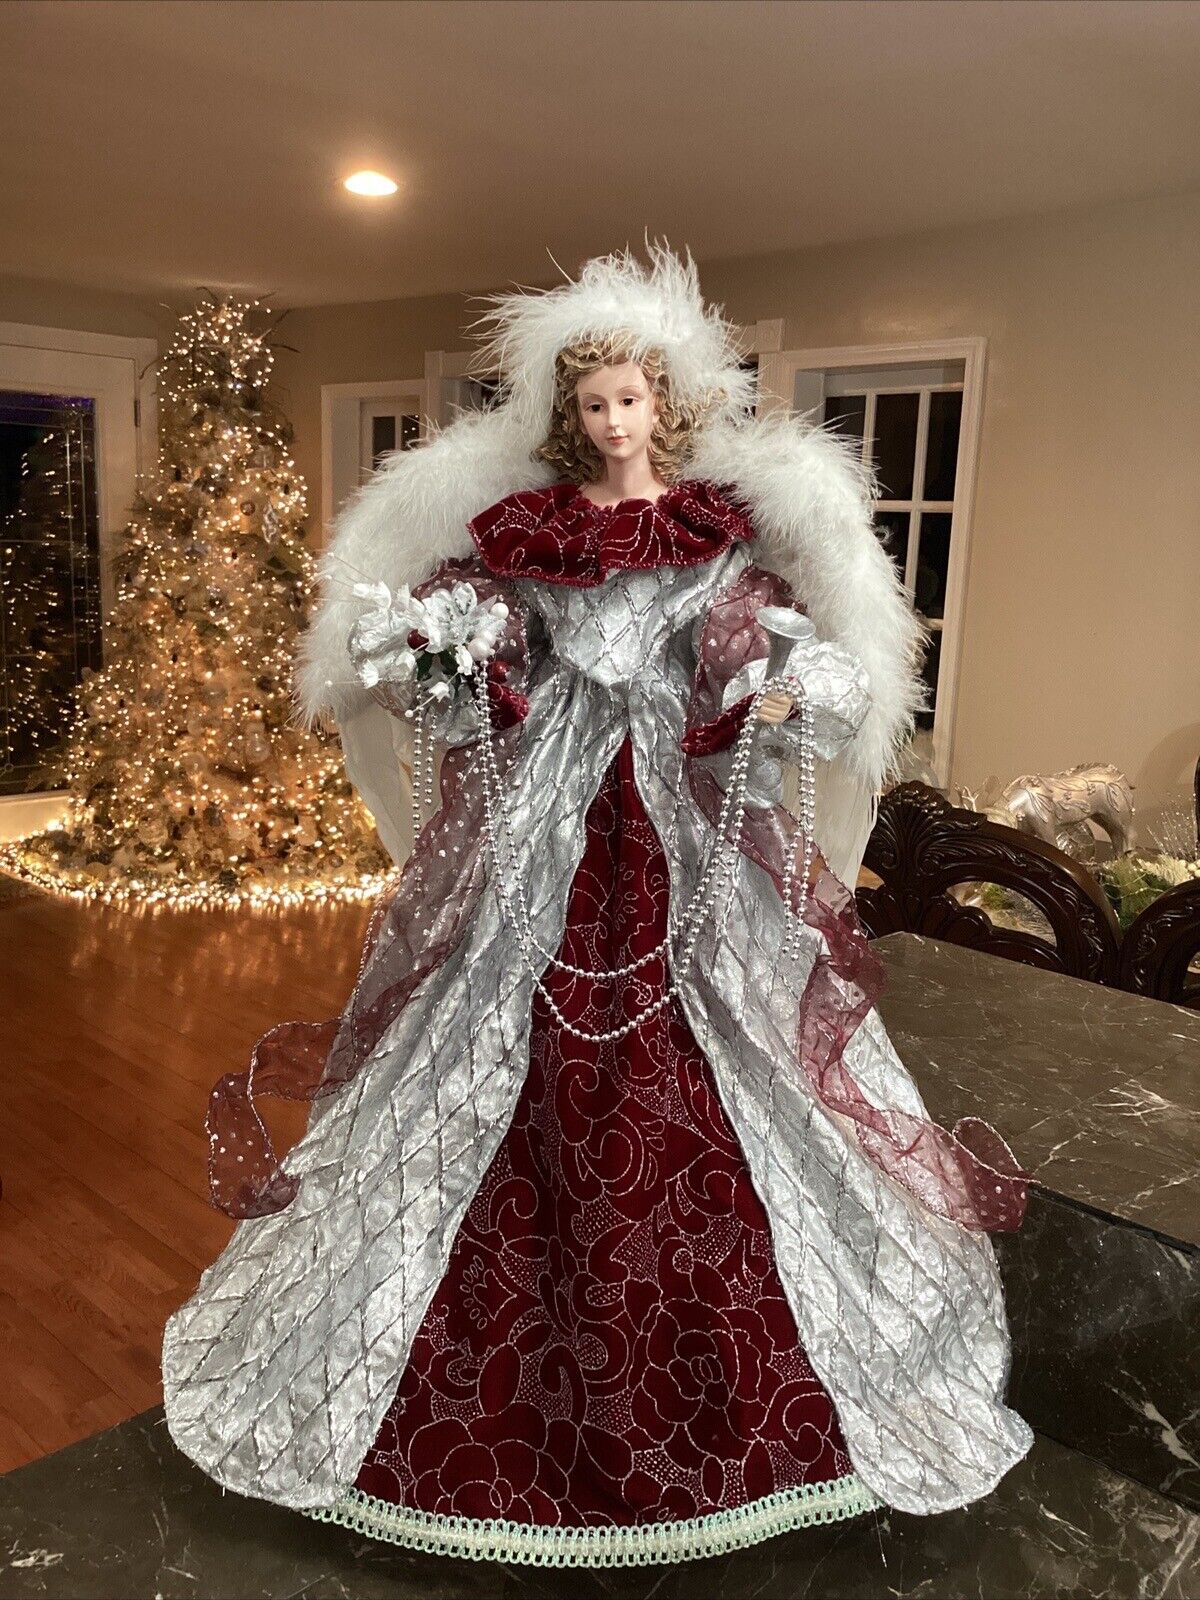 STUNNING Victorian Christmas Angel Tree Topper 25” TALL Silver And Burgundy Gown